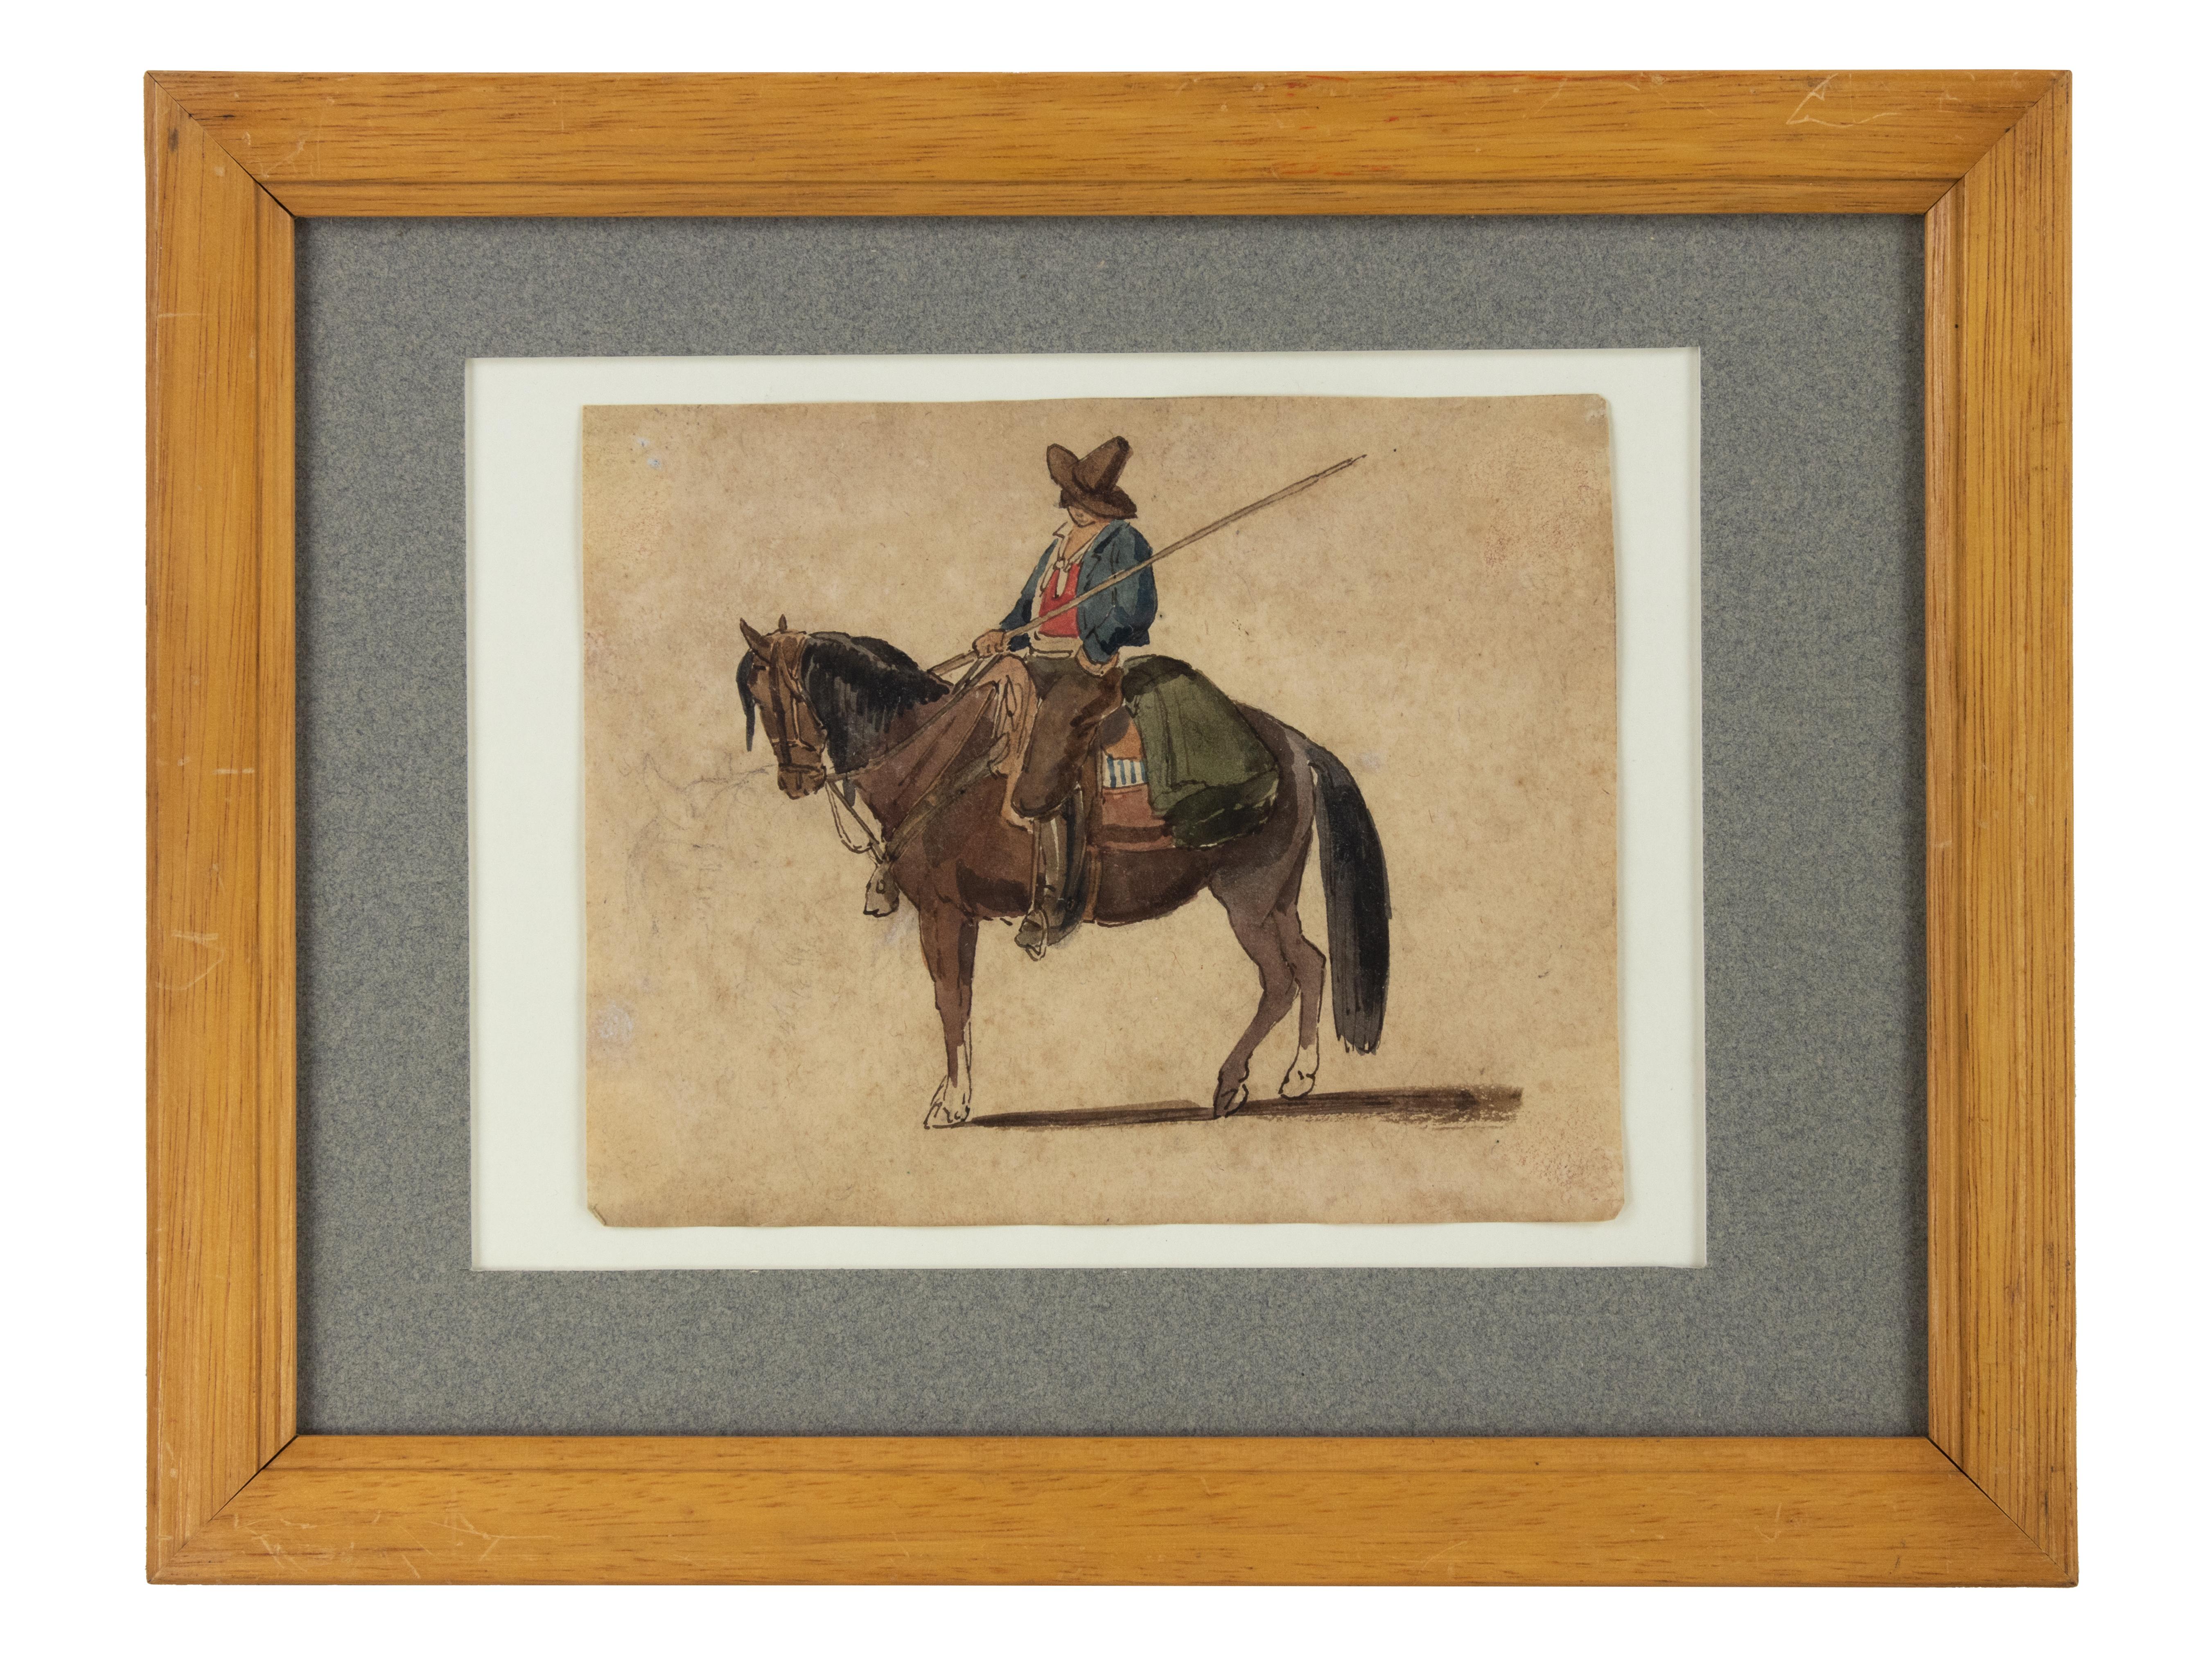 A Cowboy on the Horse - nk and Watercolor by C. Coleman - Late 1800 - Art by Charles Coleman